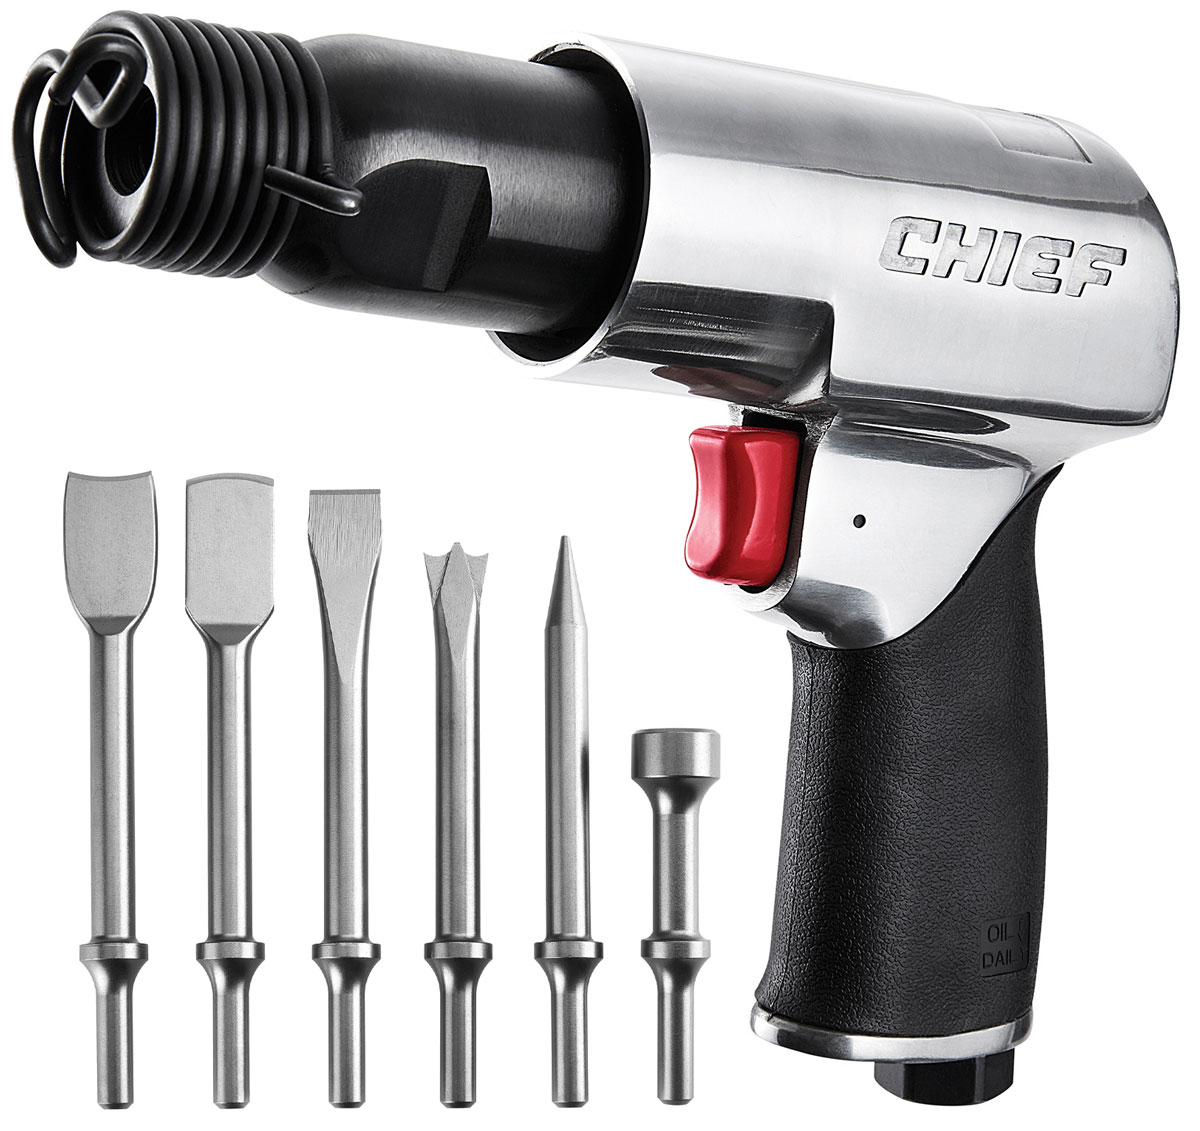 4: Available from Harbor Freight is the Chief Professional Medium Barrel Air Hammer (PN 56990) and the Professional 6-Piece Air Hammer Chisel Set (PN 56541)